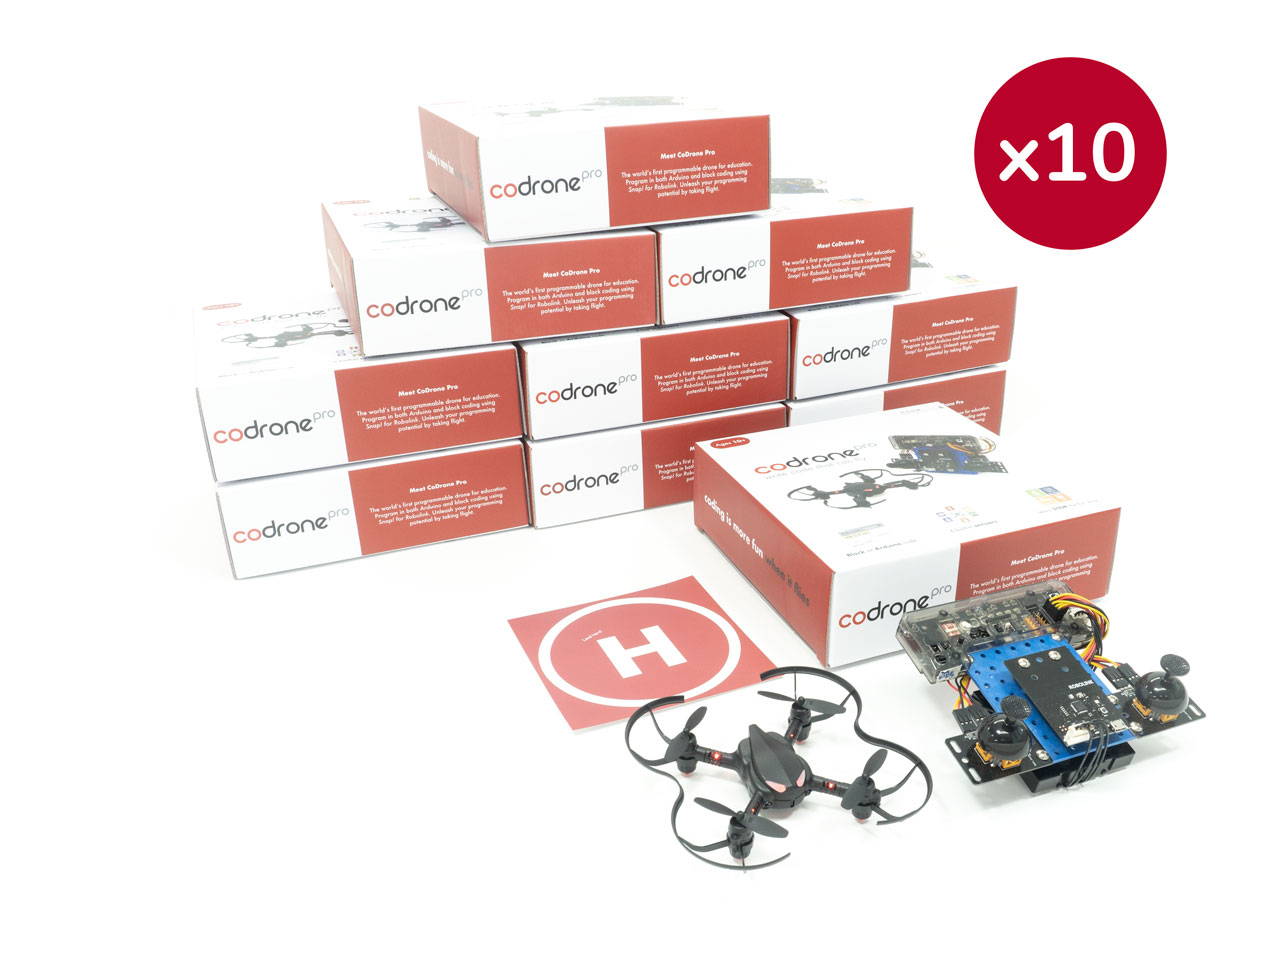 CoDrone Pro classroom set of 10 drones, with a buildable and programmable controller. The drone can be coded in Python, Blockly, and Arduino.